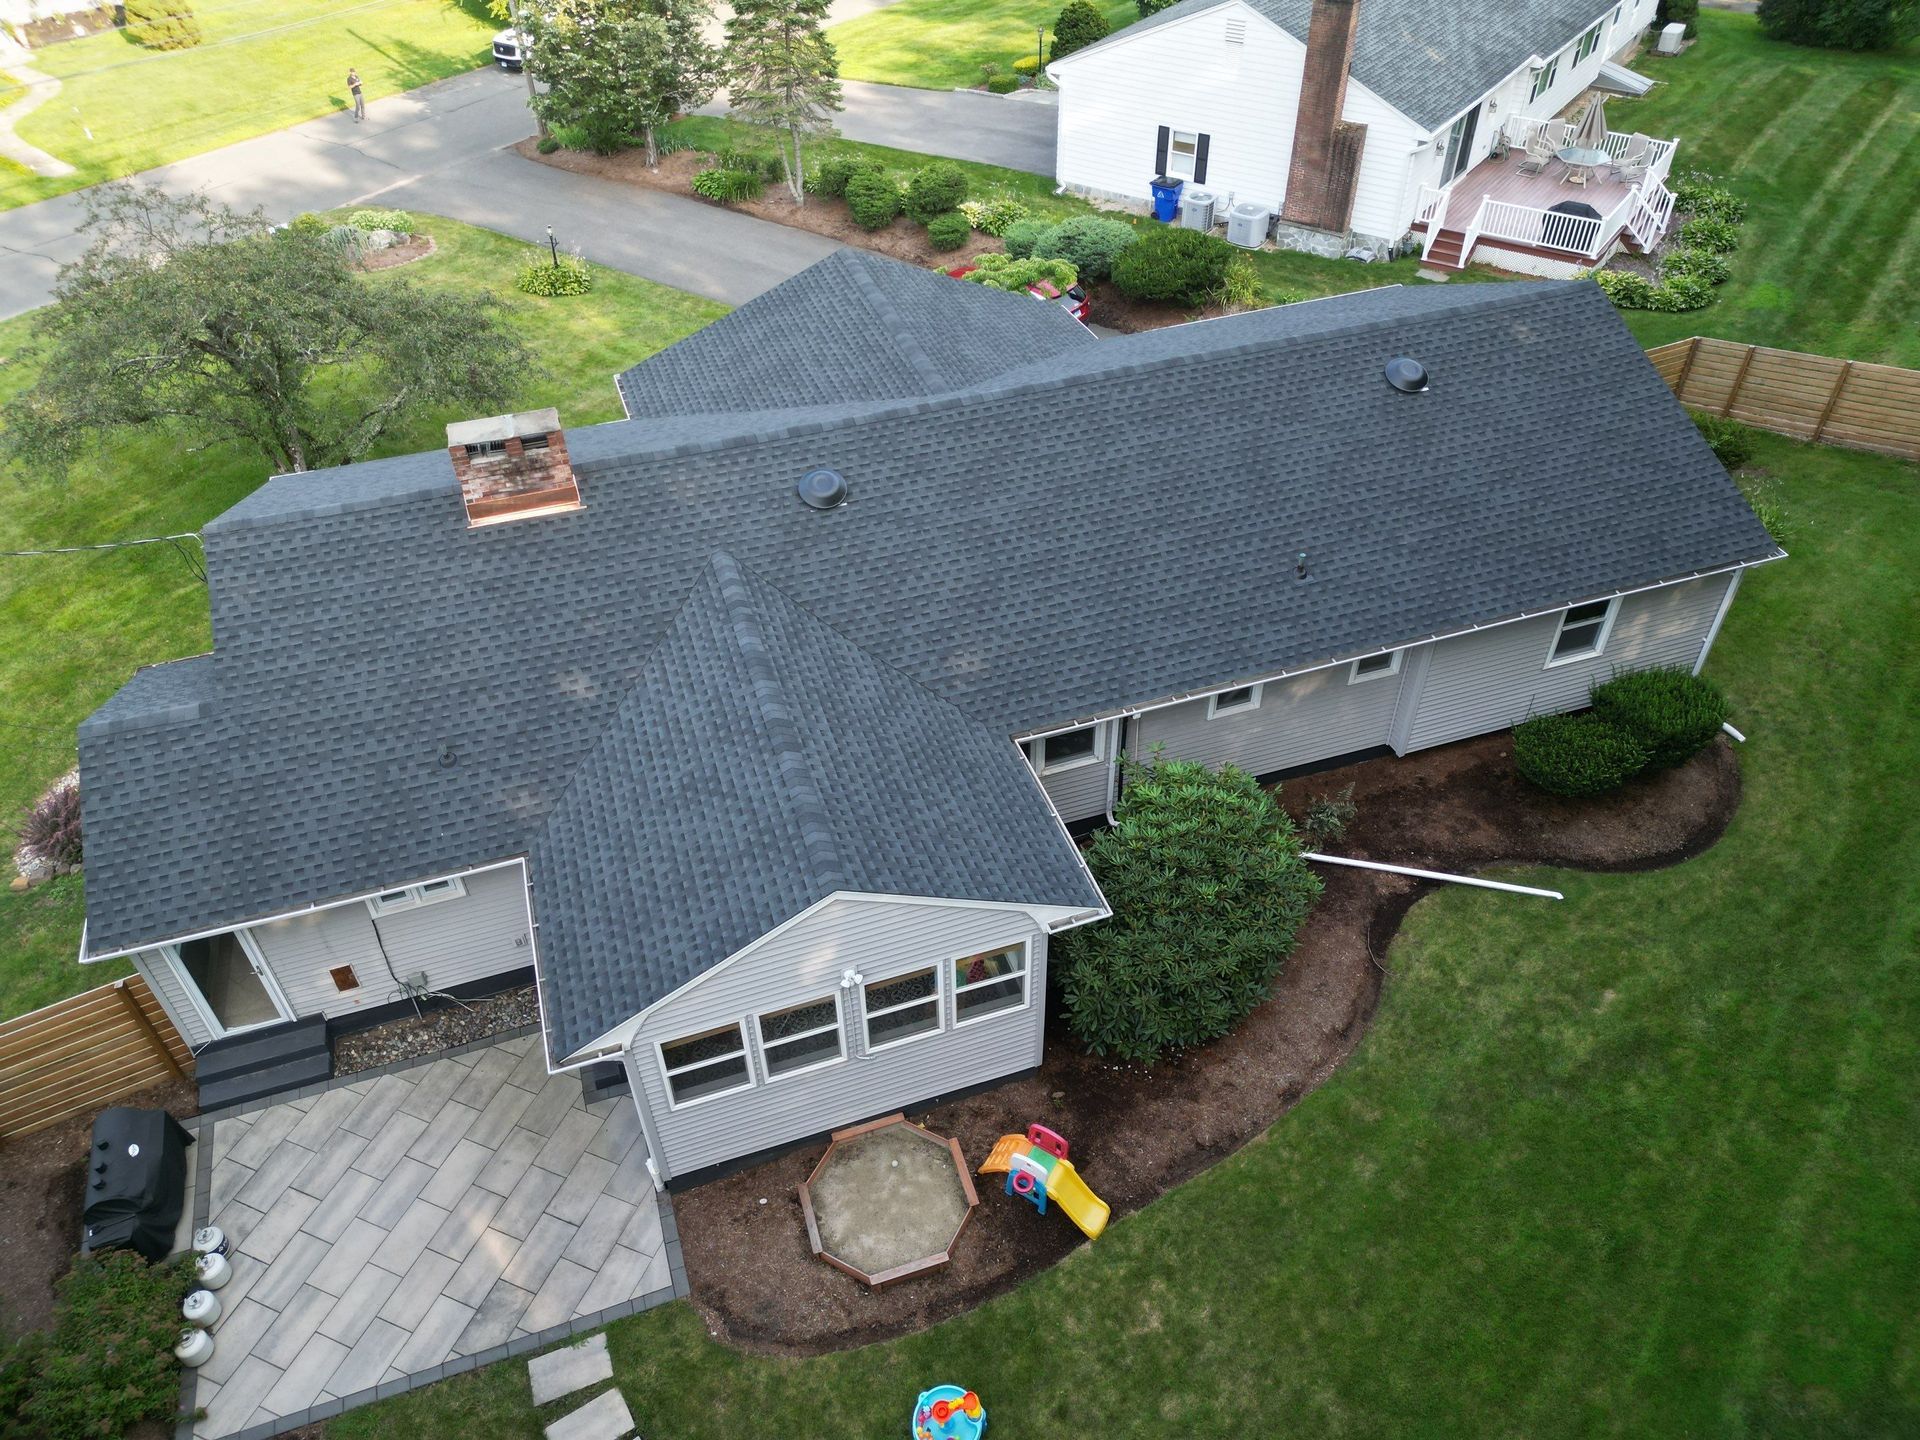 Professional roofer repairing damaged shingles on a residential home in West Hartford, Connecticut.